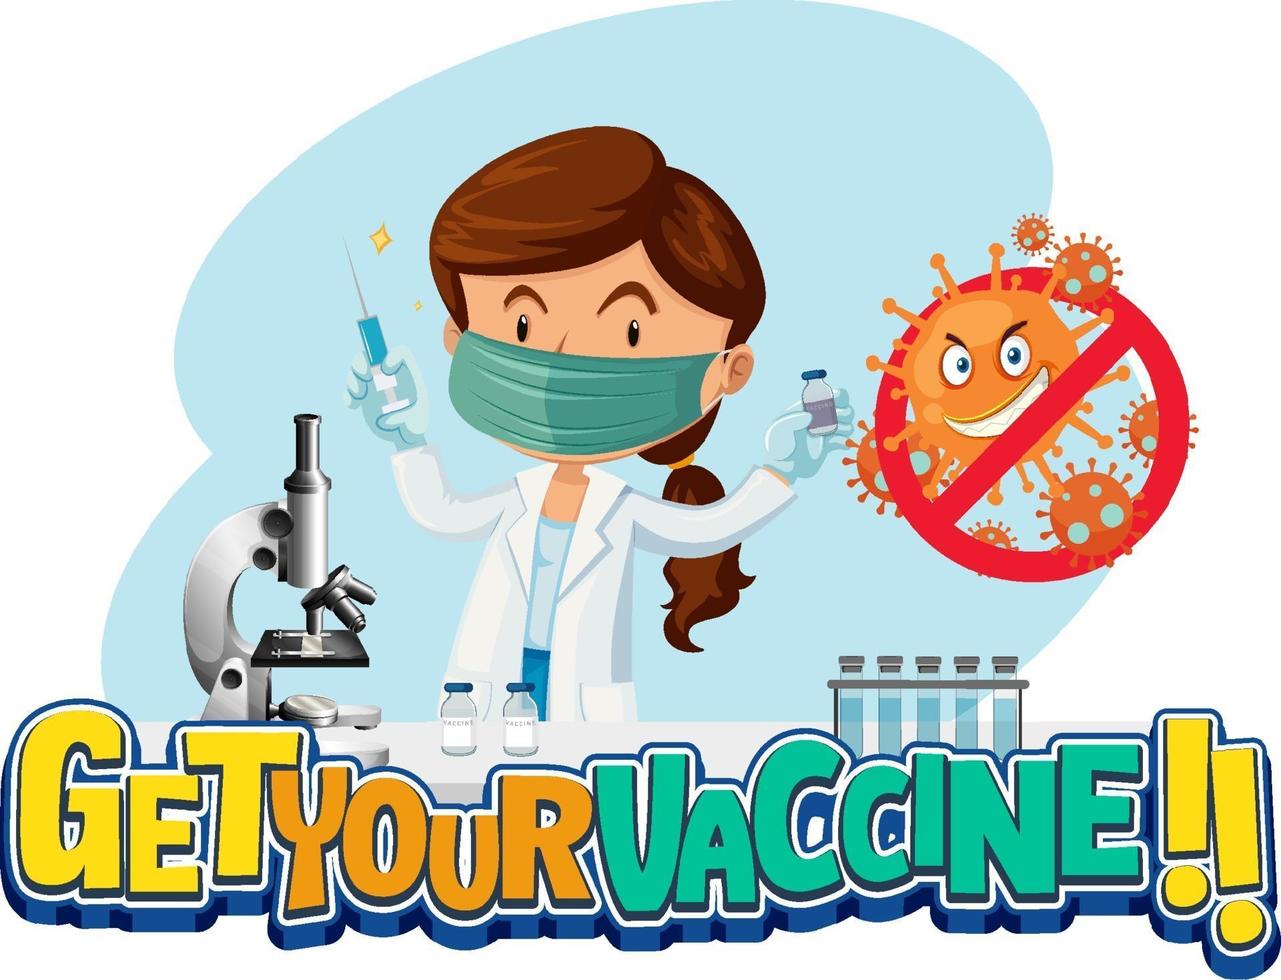 Get Your Vaccine font banner with a doctor wears medical mask vector